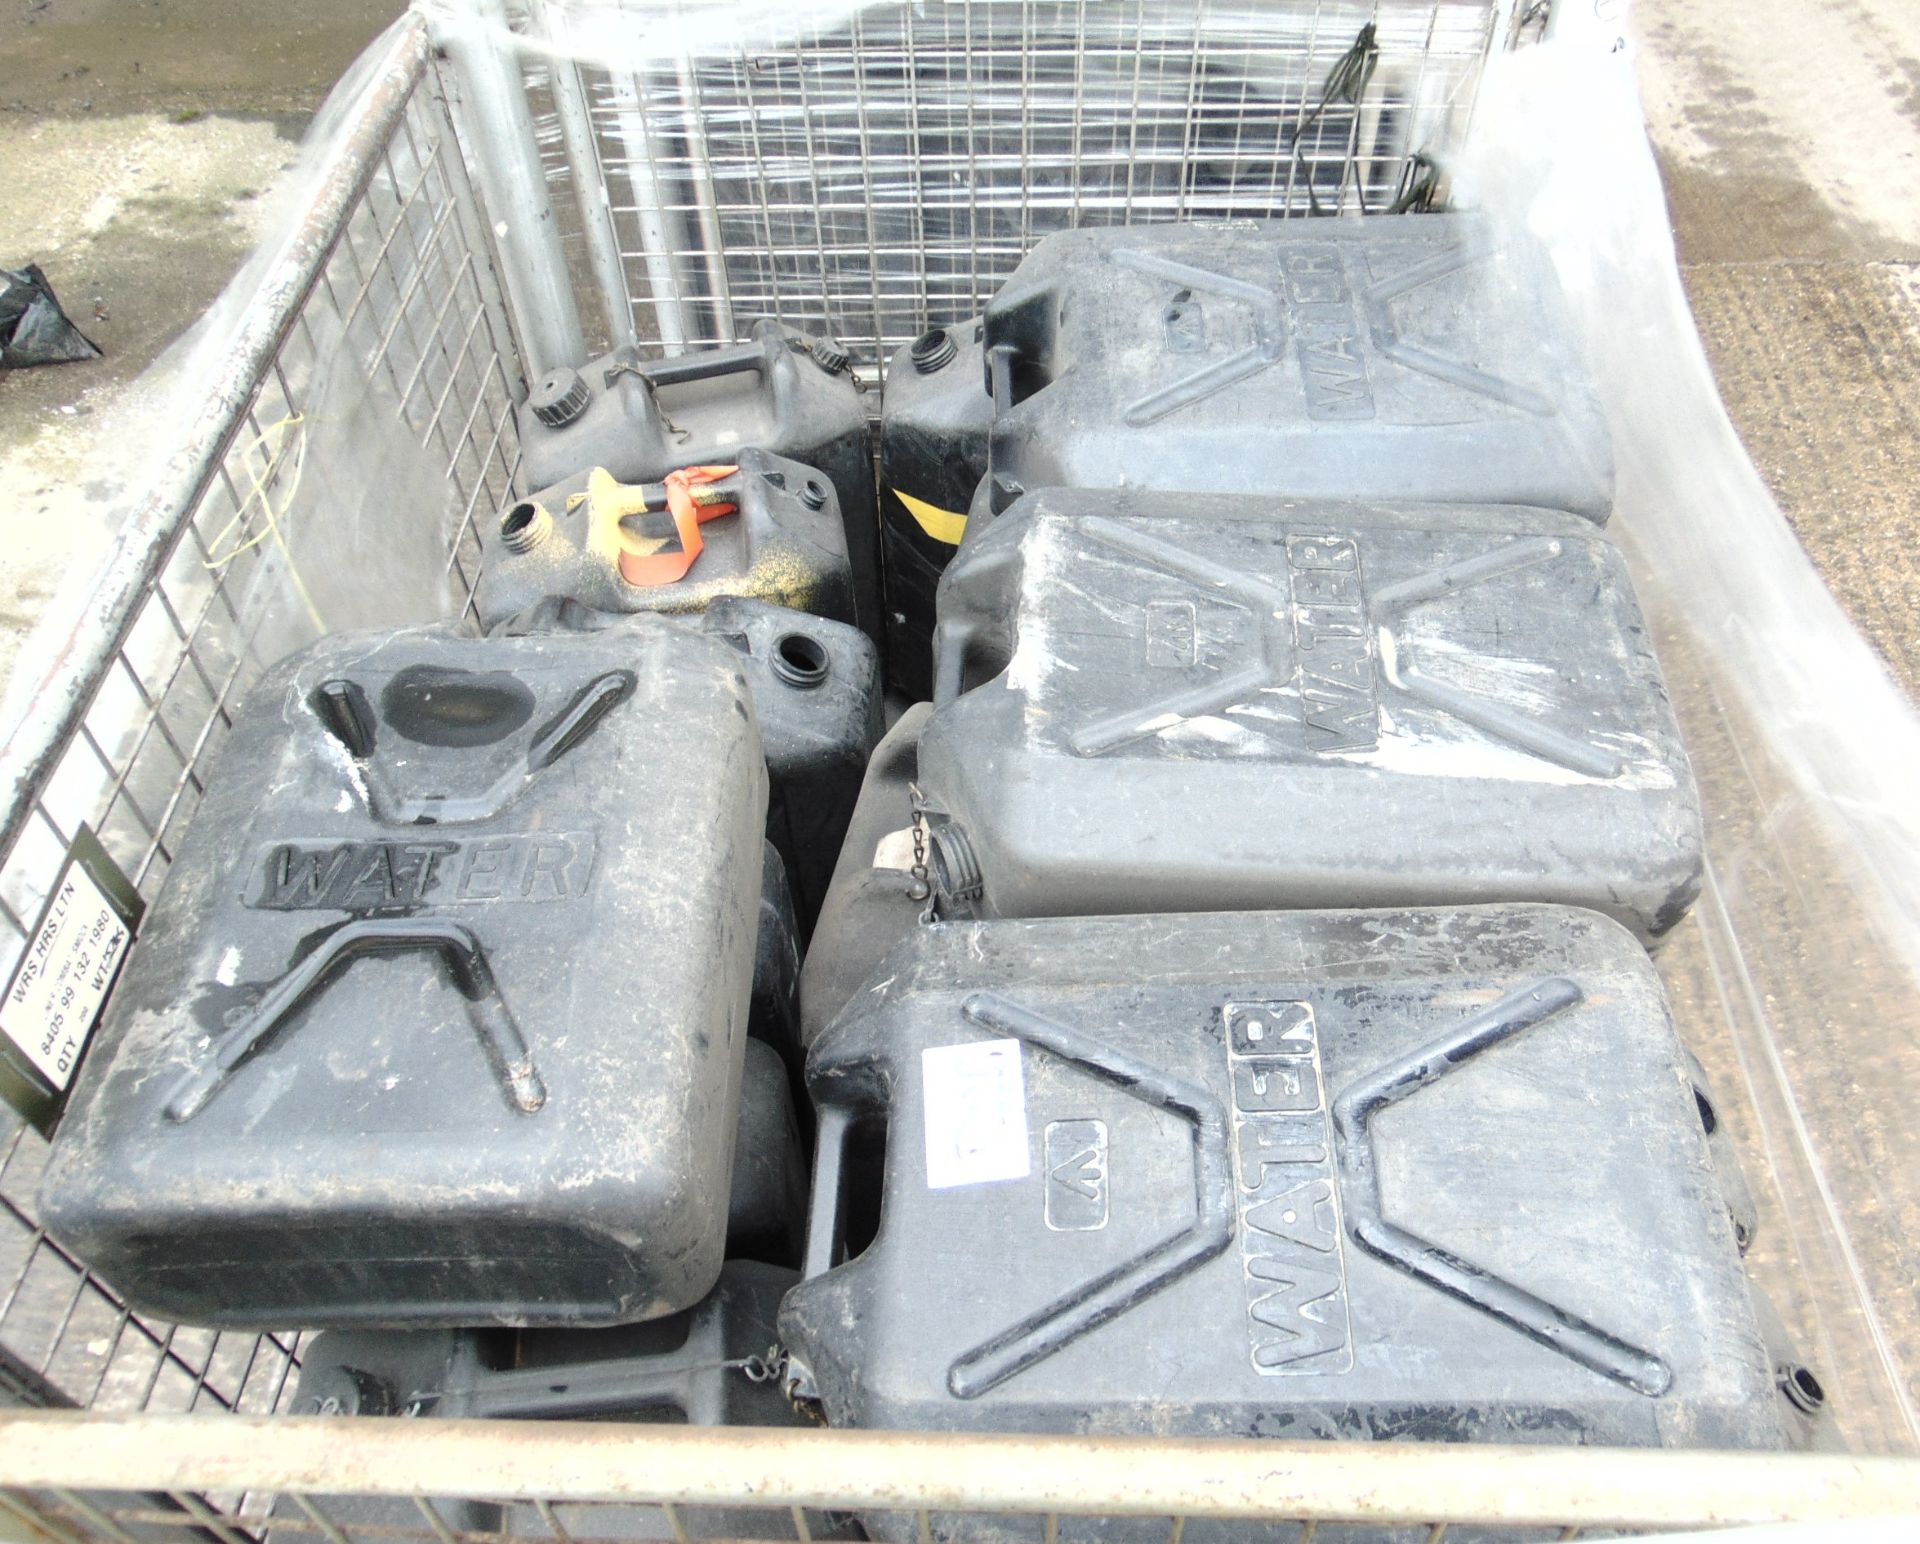 20 x 20 Litre Plastic Water Jerry Cans MoD Stock - Image 2 of 5